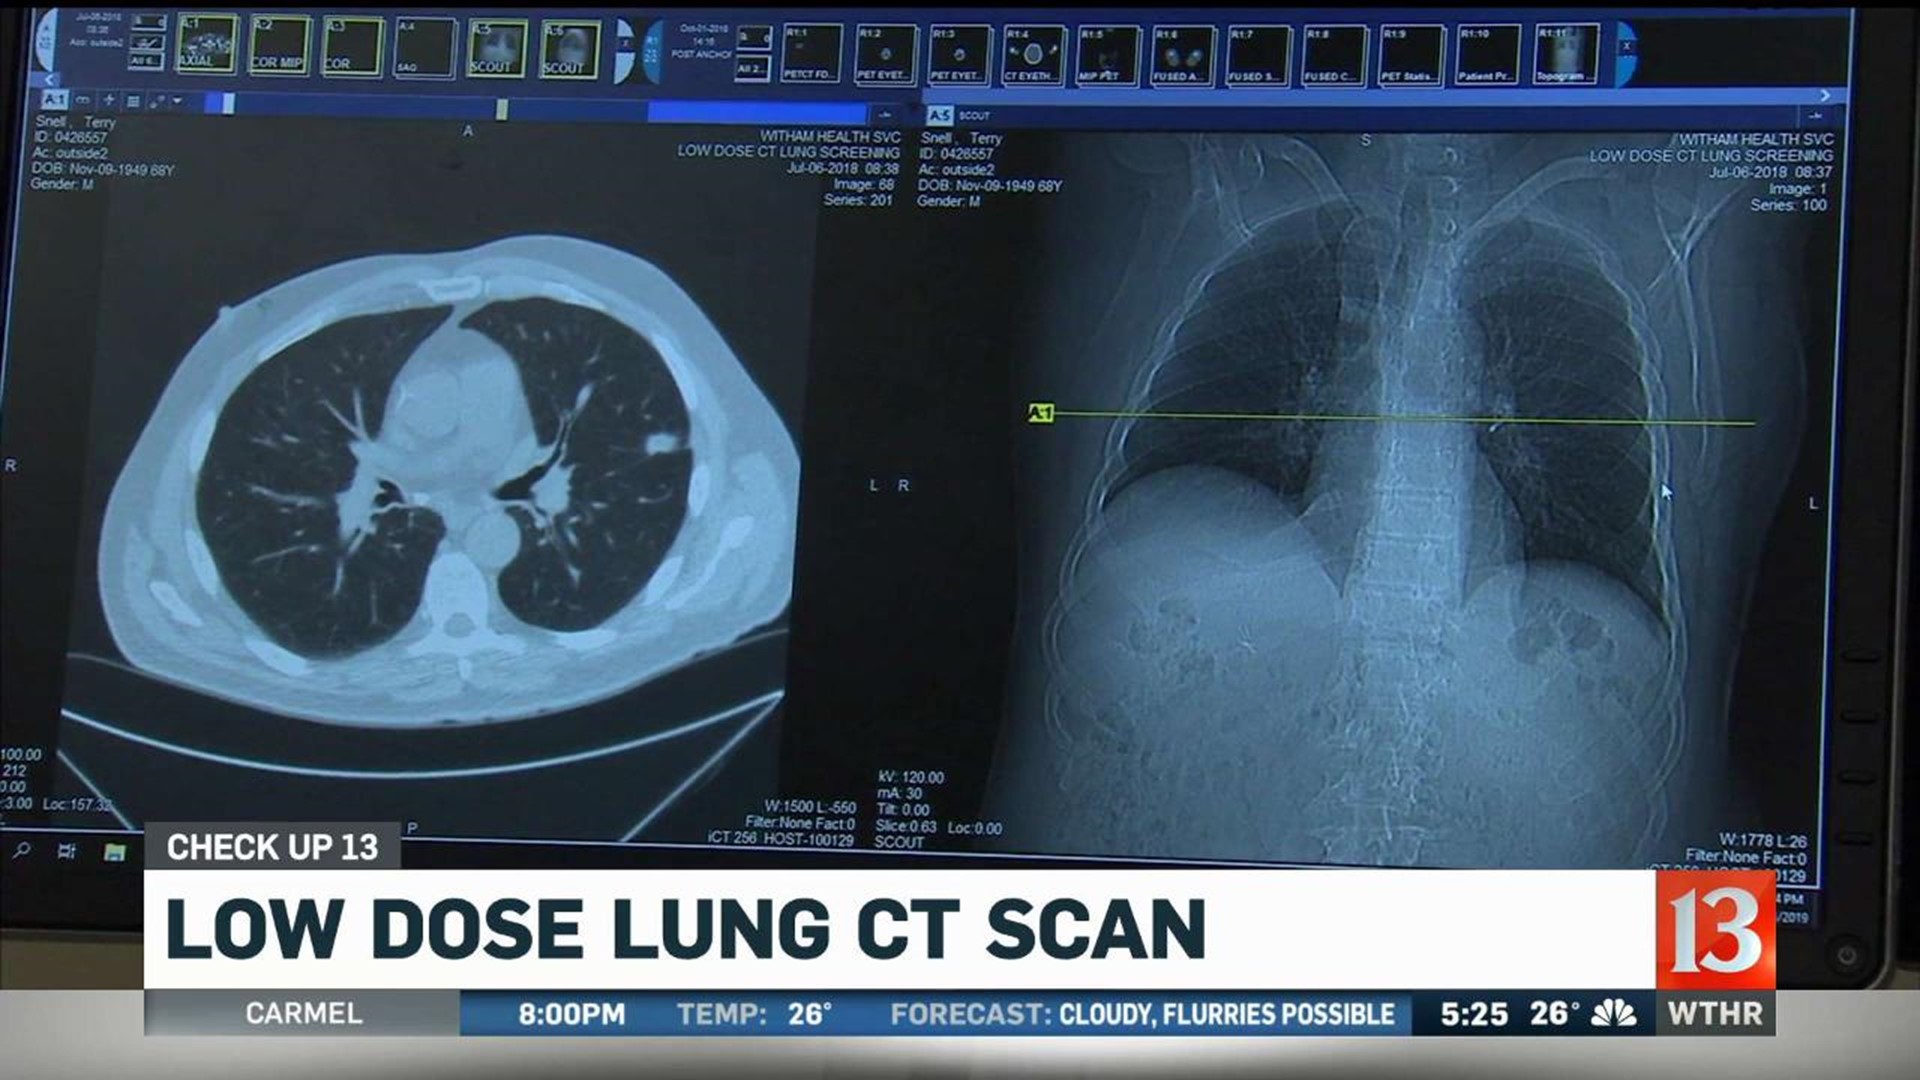 Check Up 13: Low dose lung CT scan